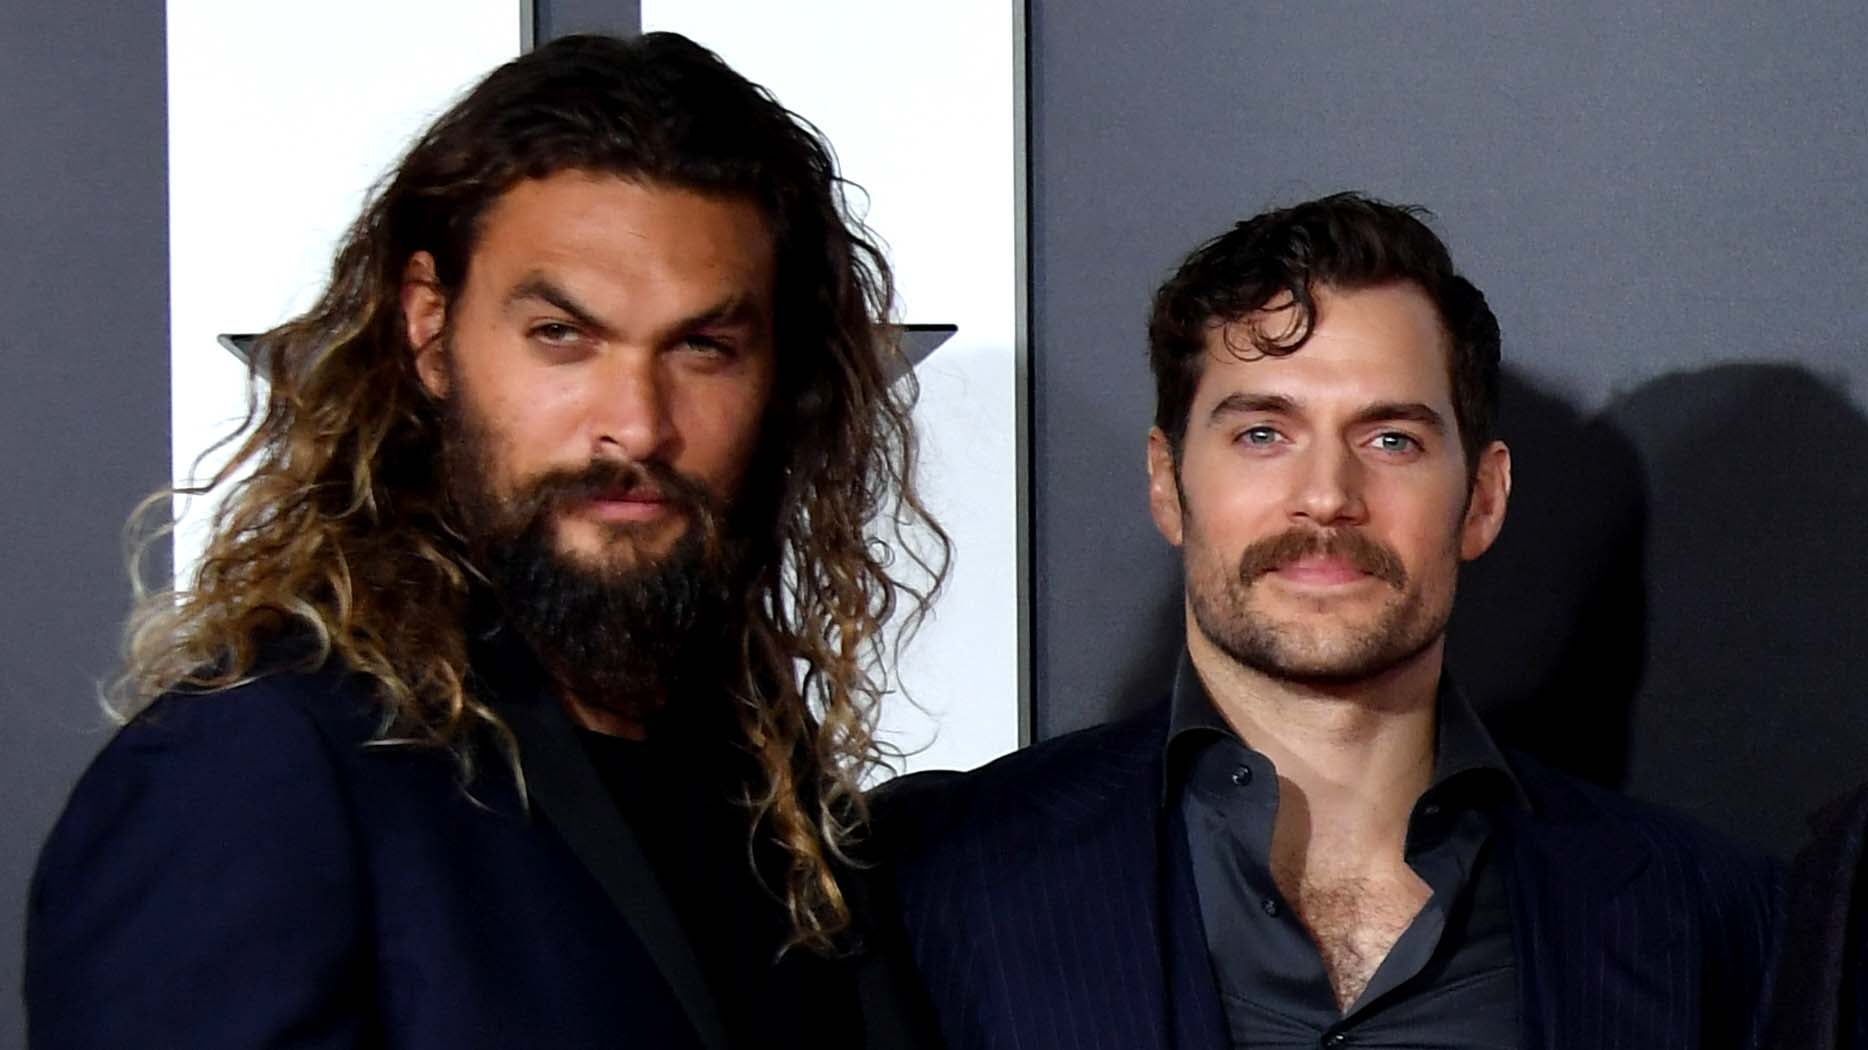 10+ Times Henry Cavill Made Us Fall Madly In Love With Him